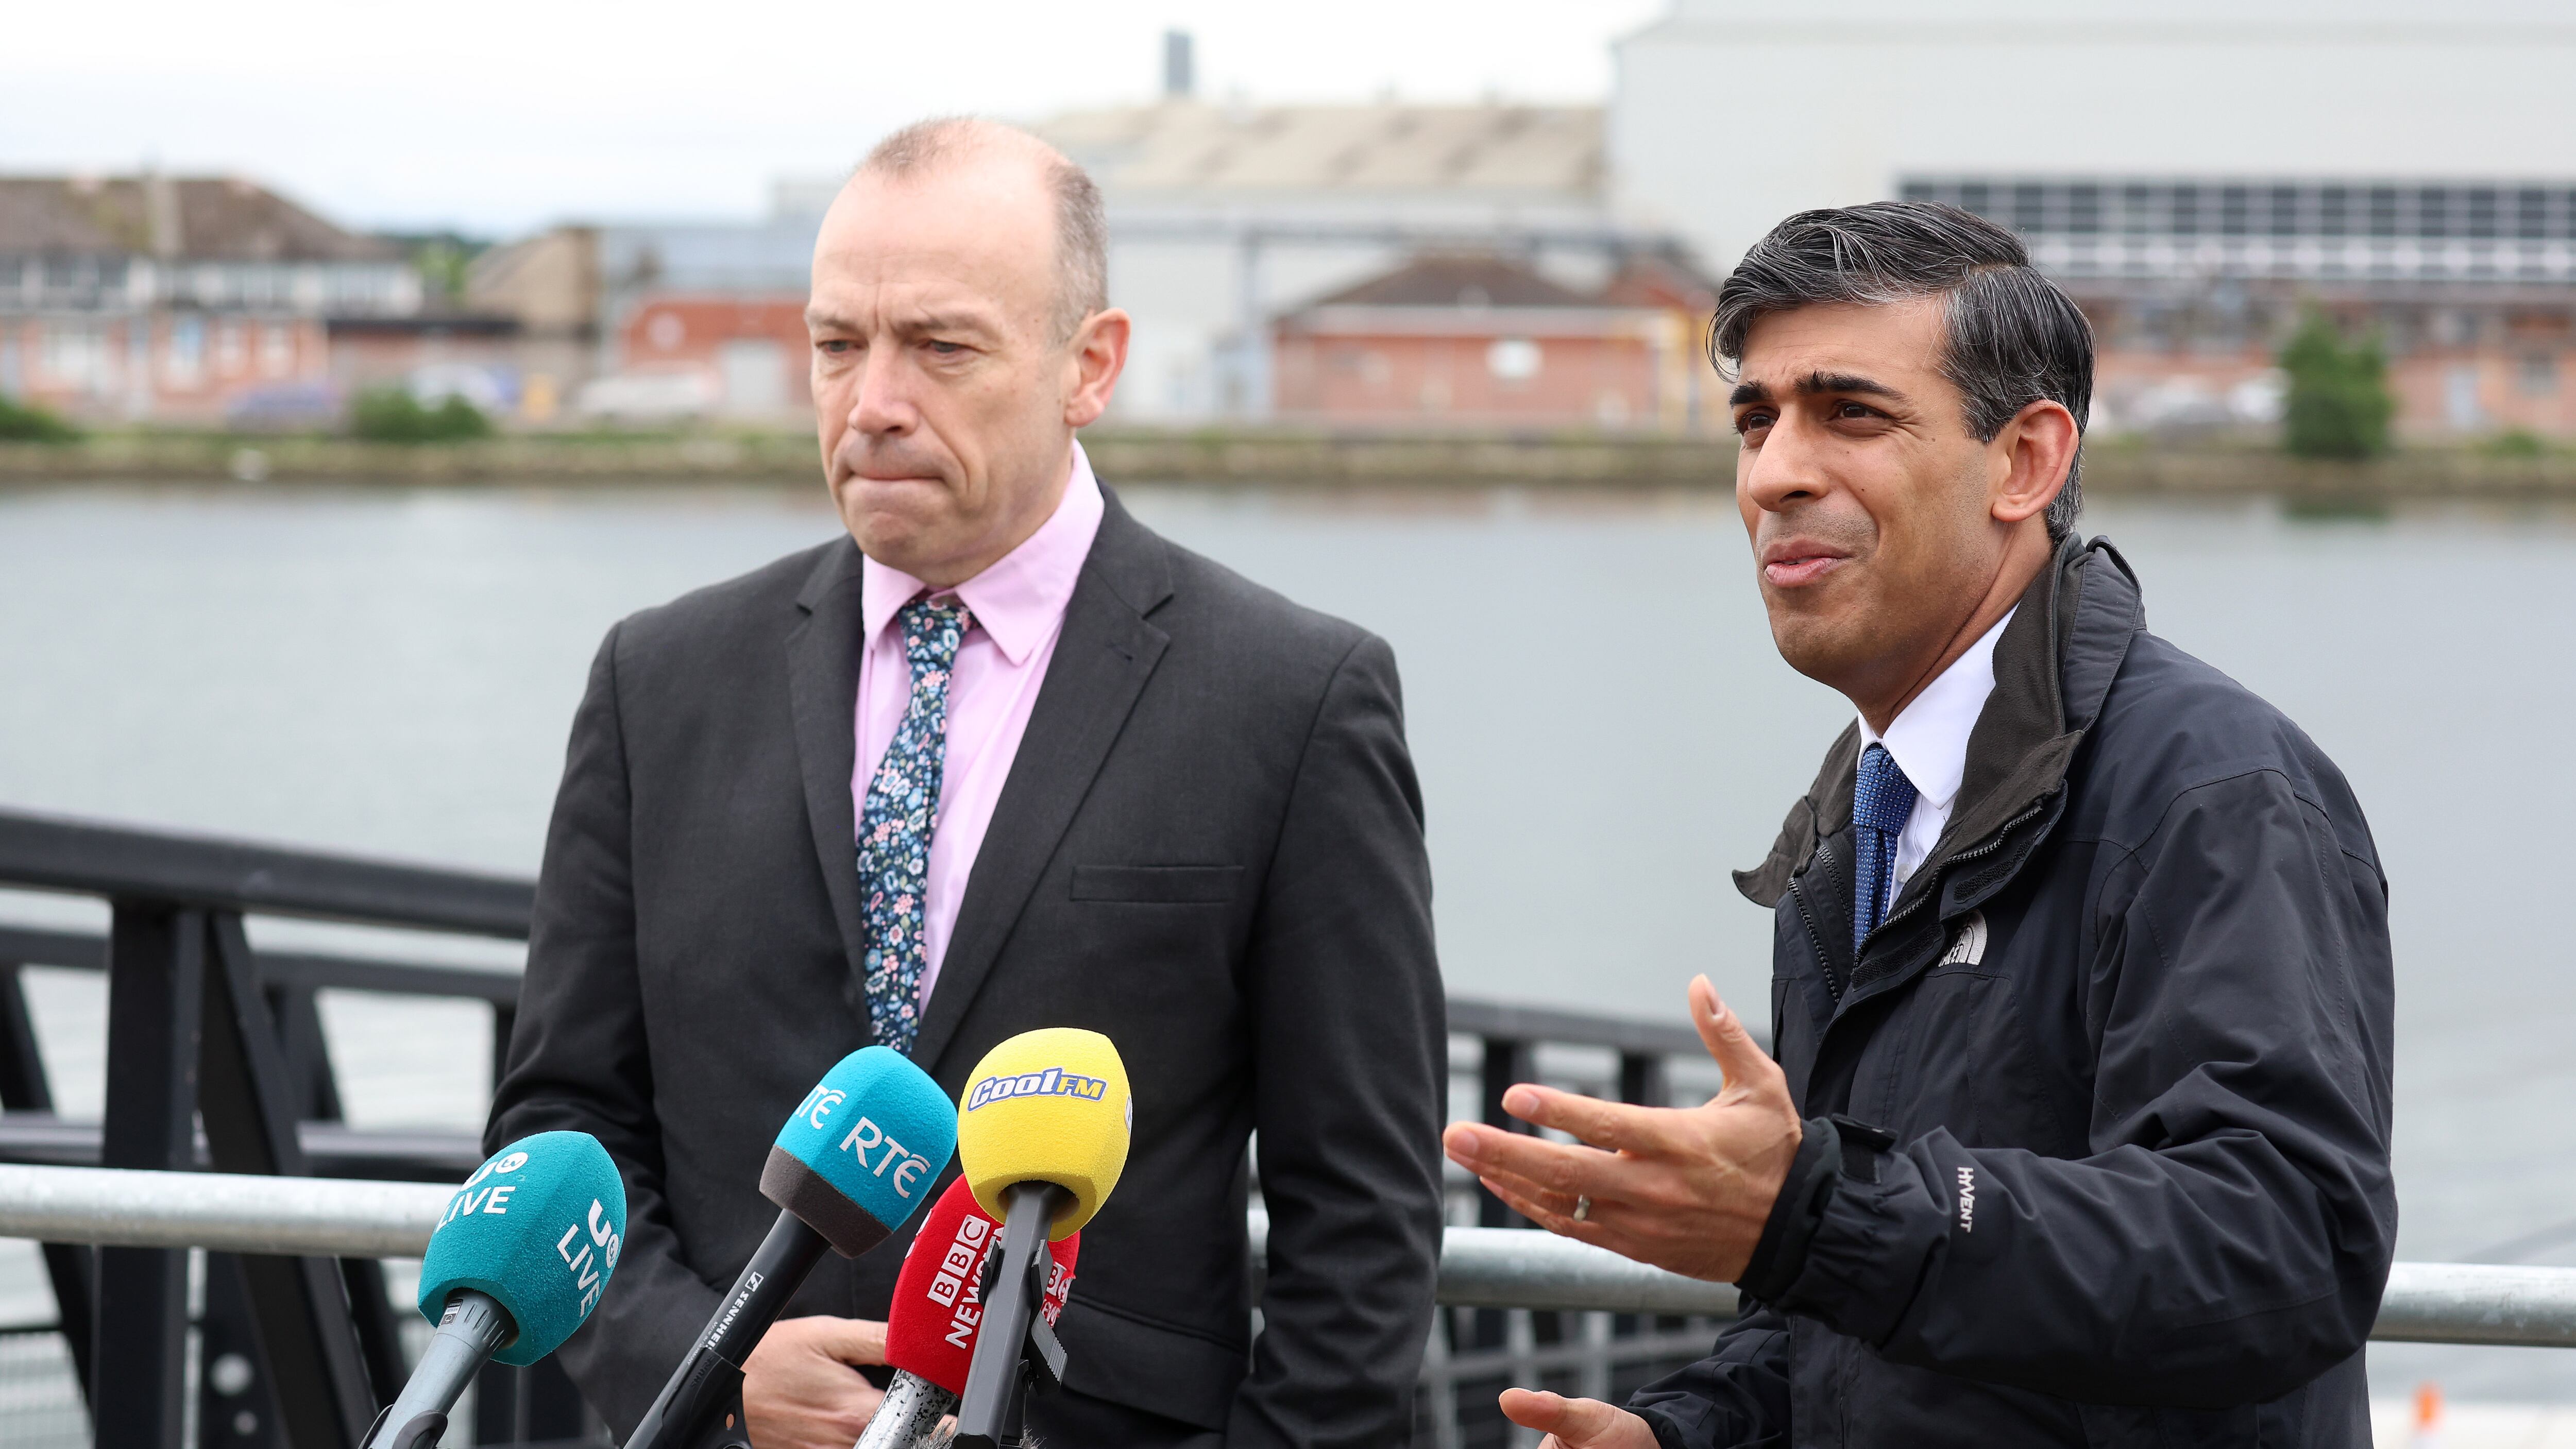 British Prime Minister Rishi Sunak in Belfast with outgoing NI Secretary of State Chris Heaton-Harris on the latest leg of his election campaign tour in Belfast. PICTURE: MAL MCCANN